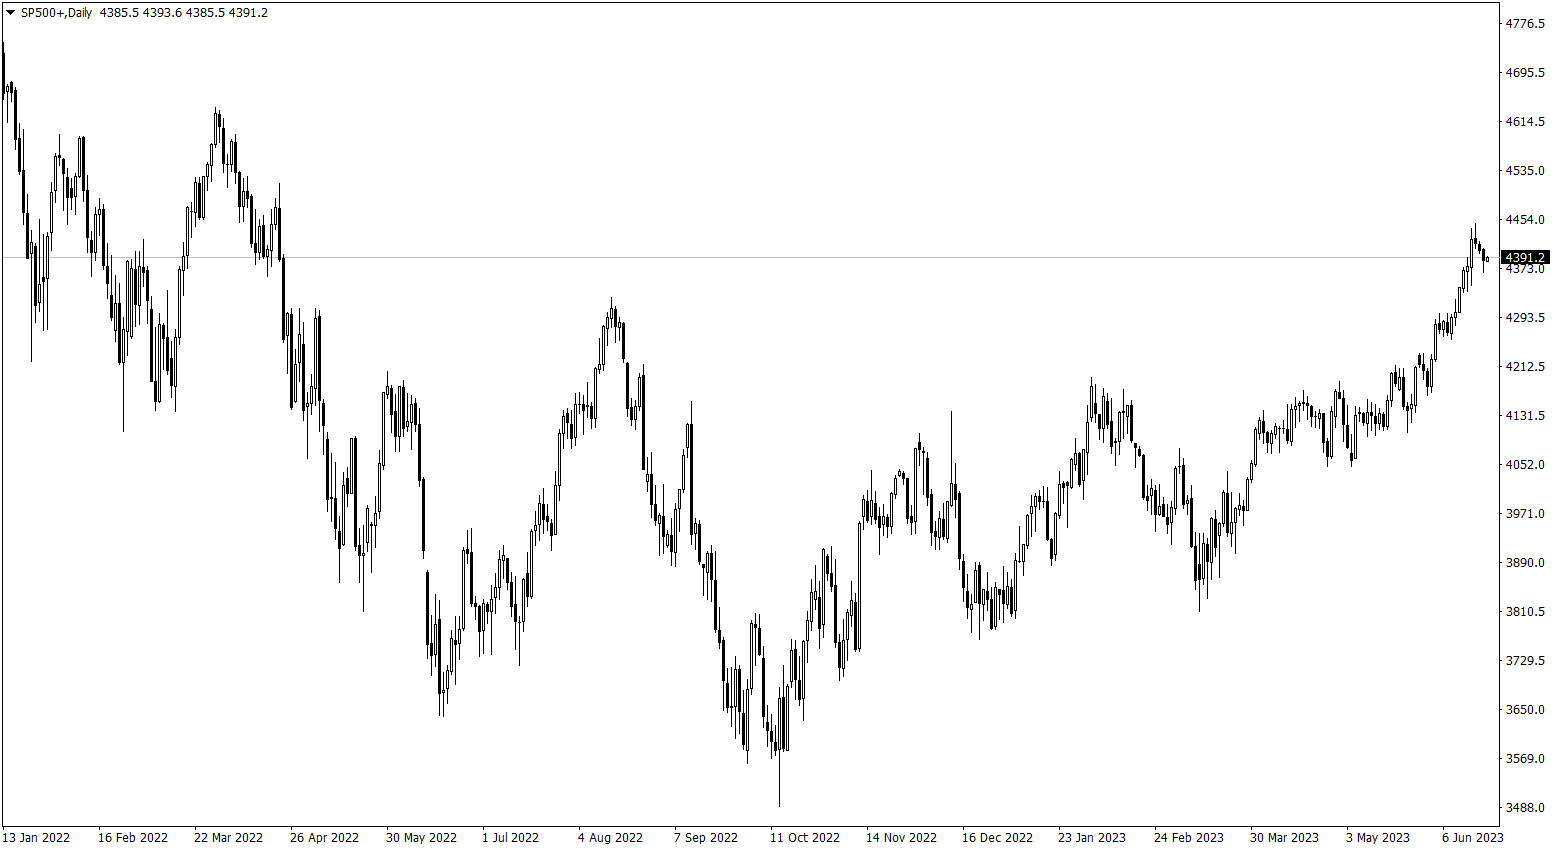 SP500-Daily210623.png